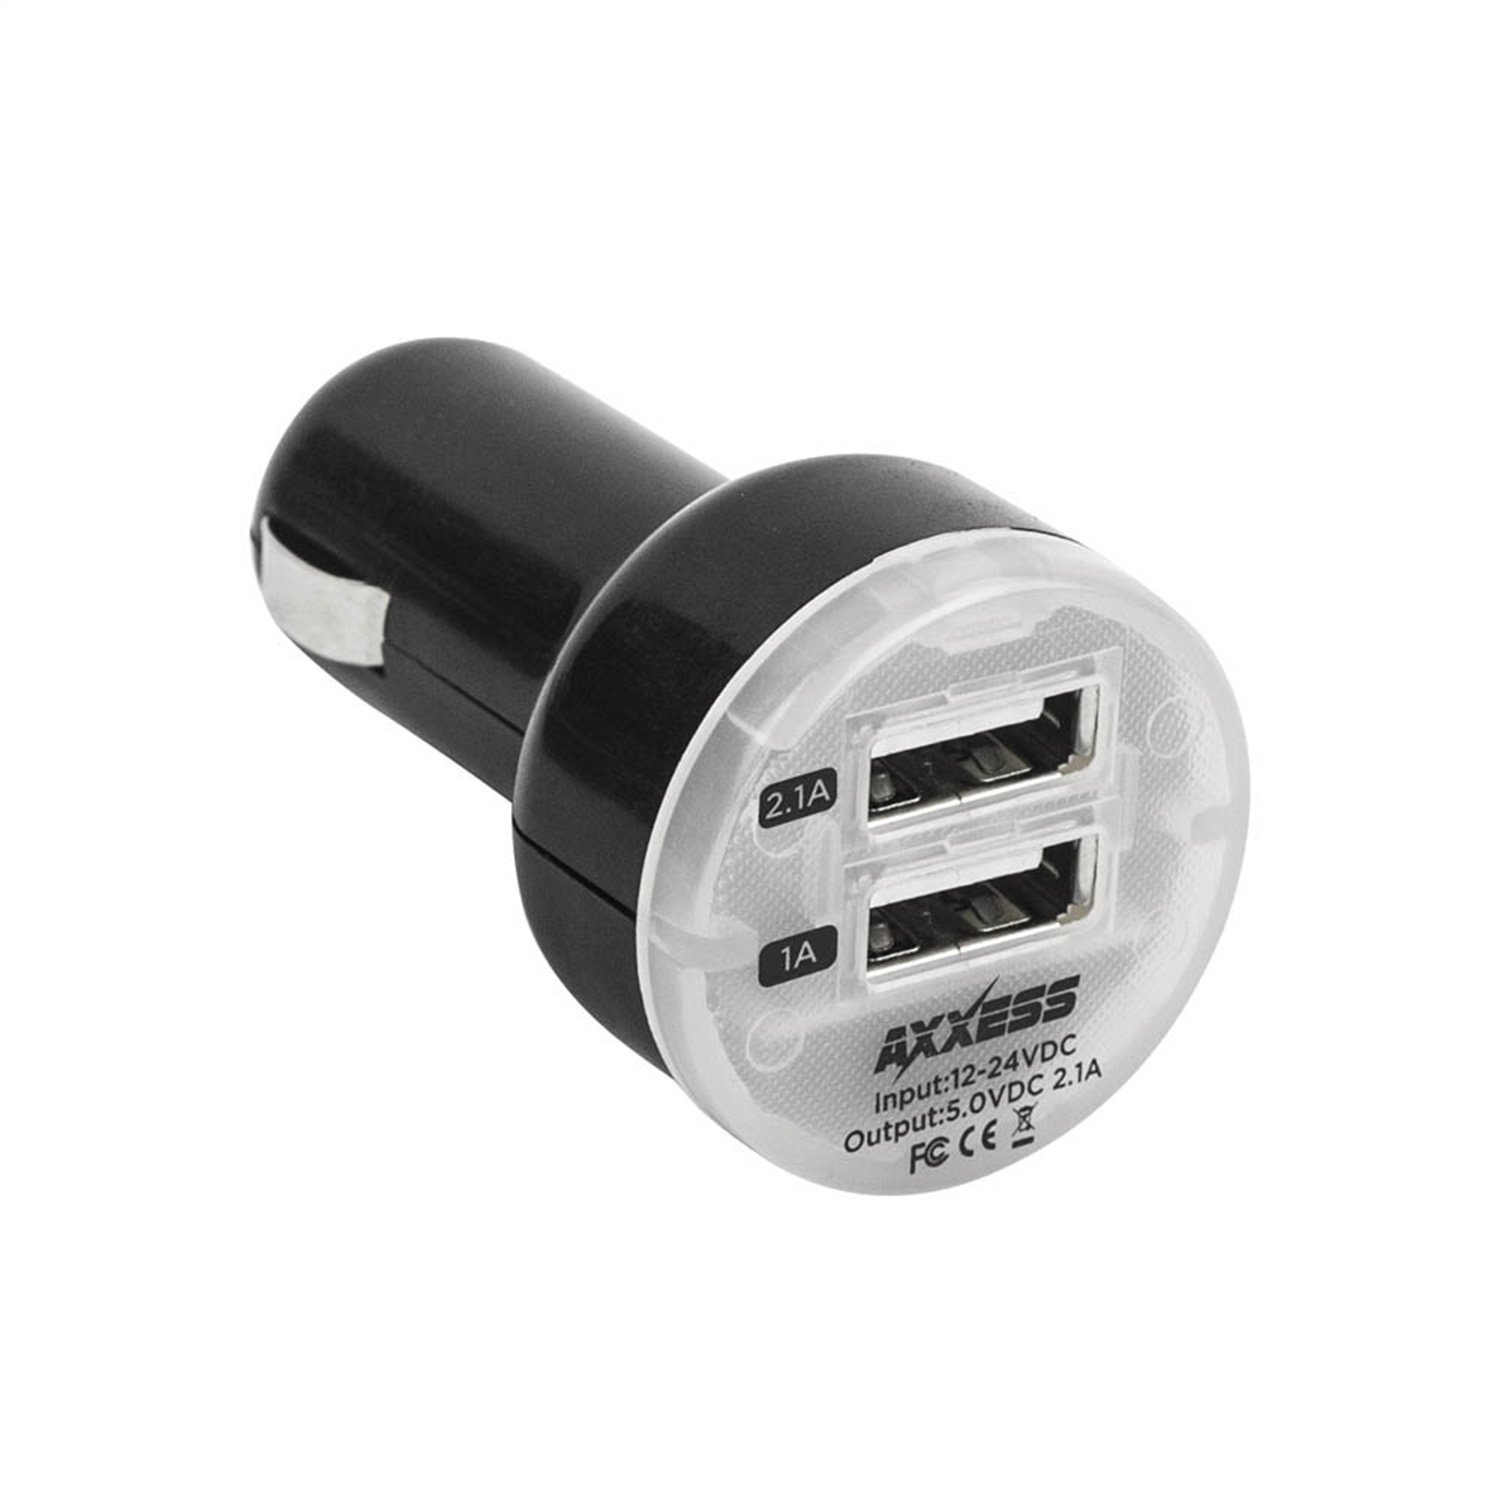 AXCLA-2USB Dual USB Compact Device Charger, 2.1 AMP